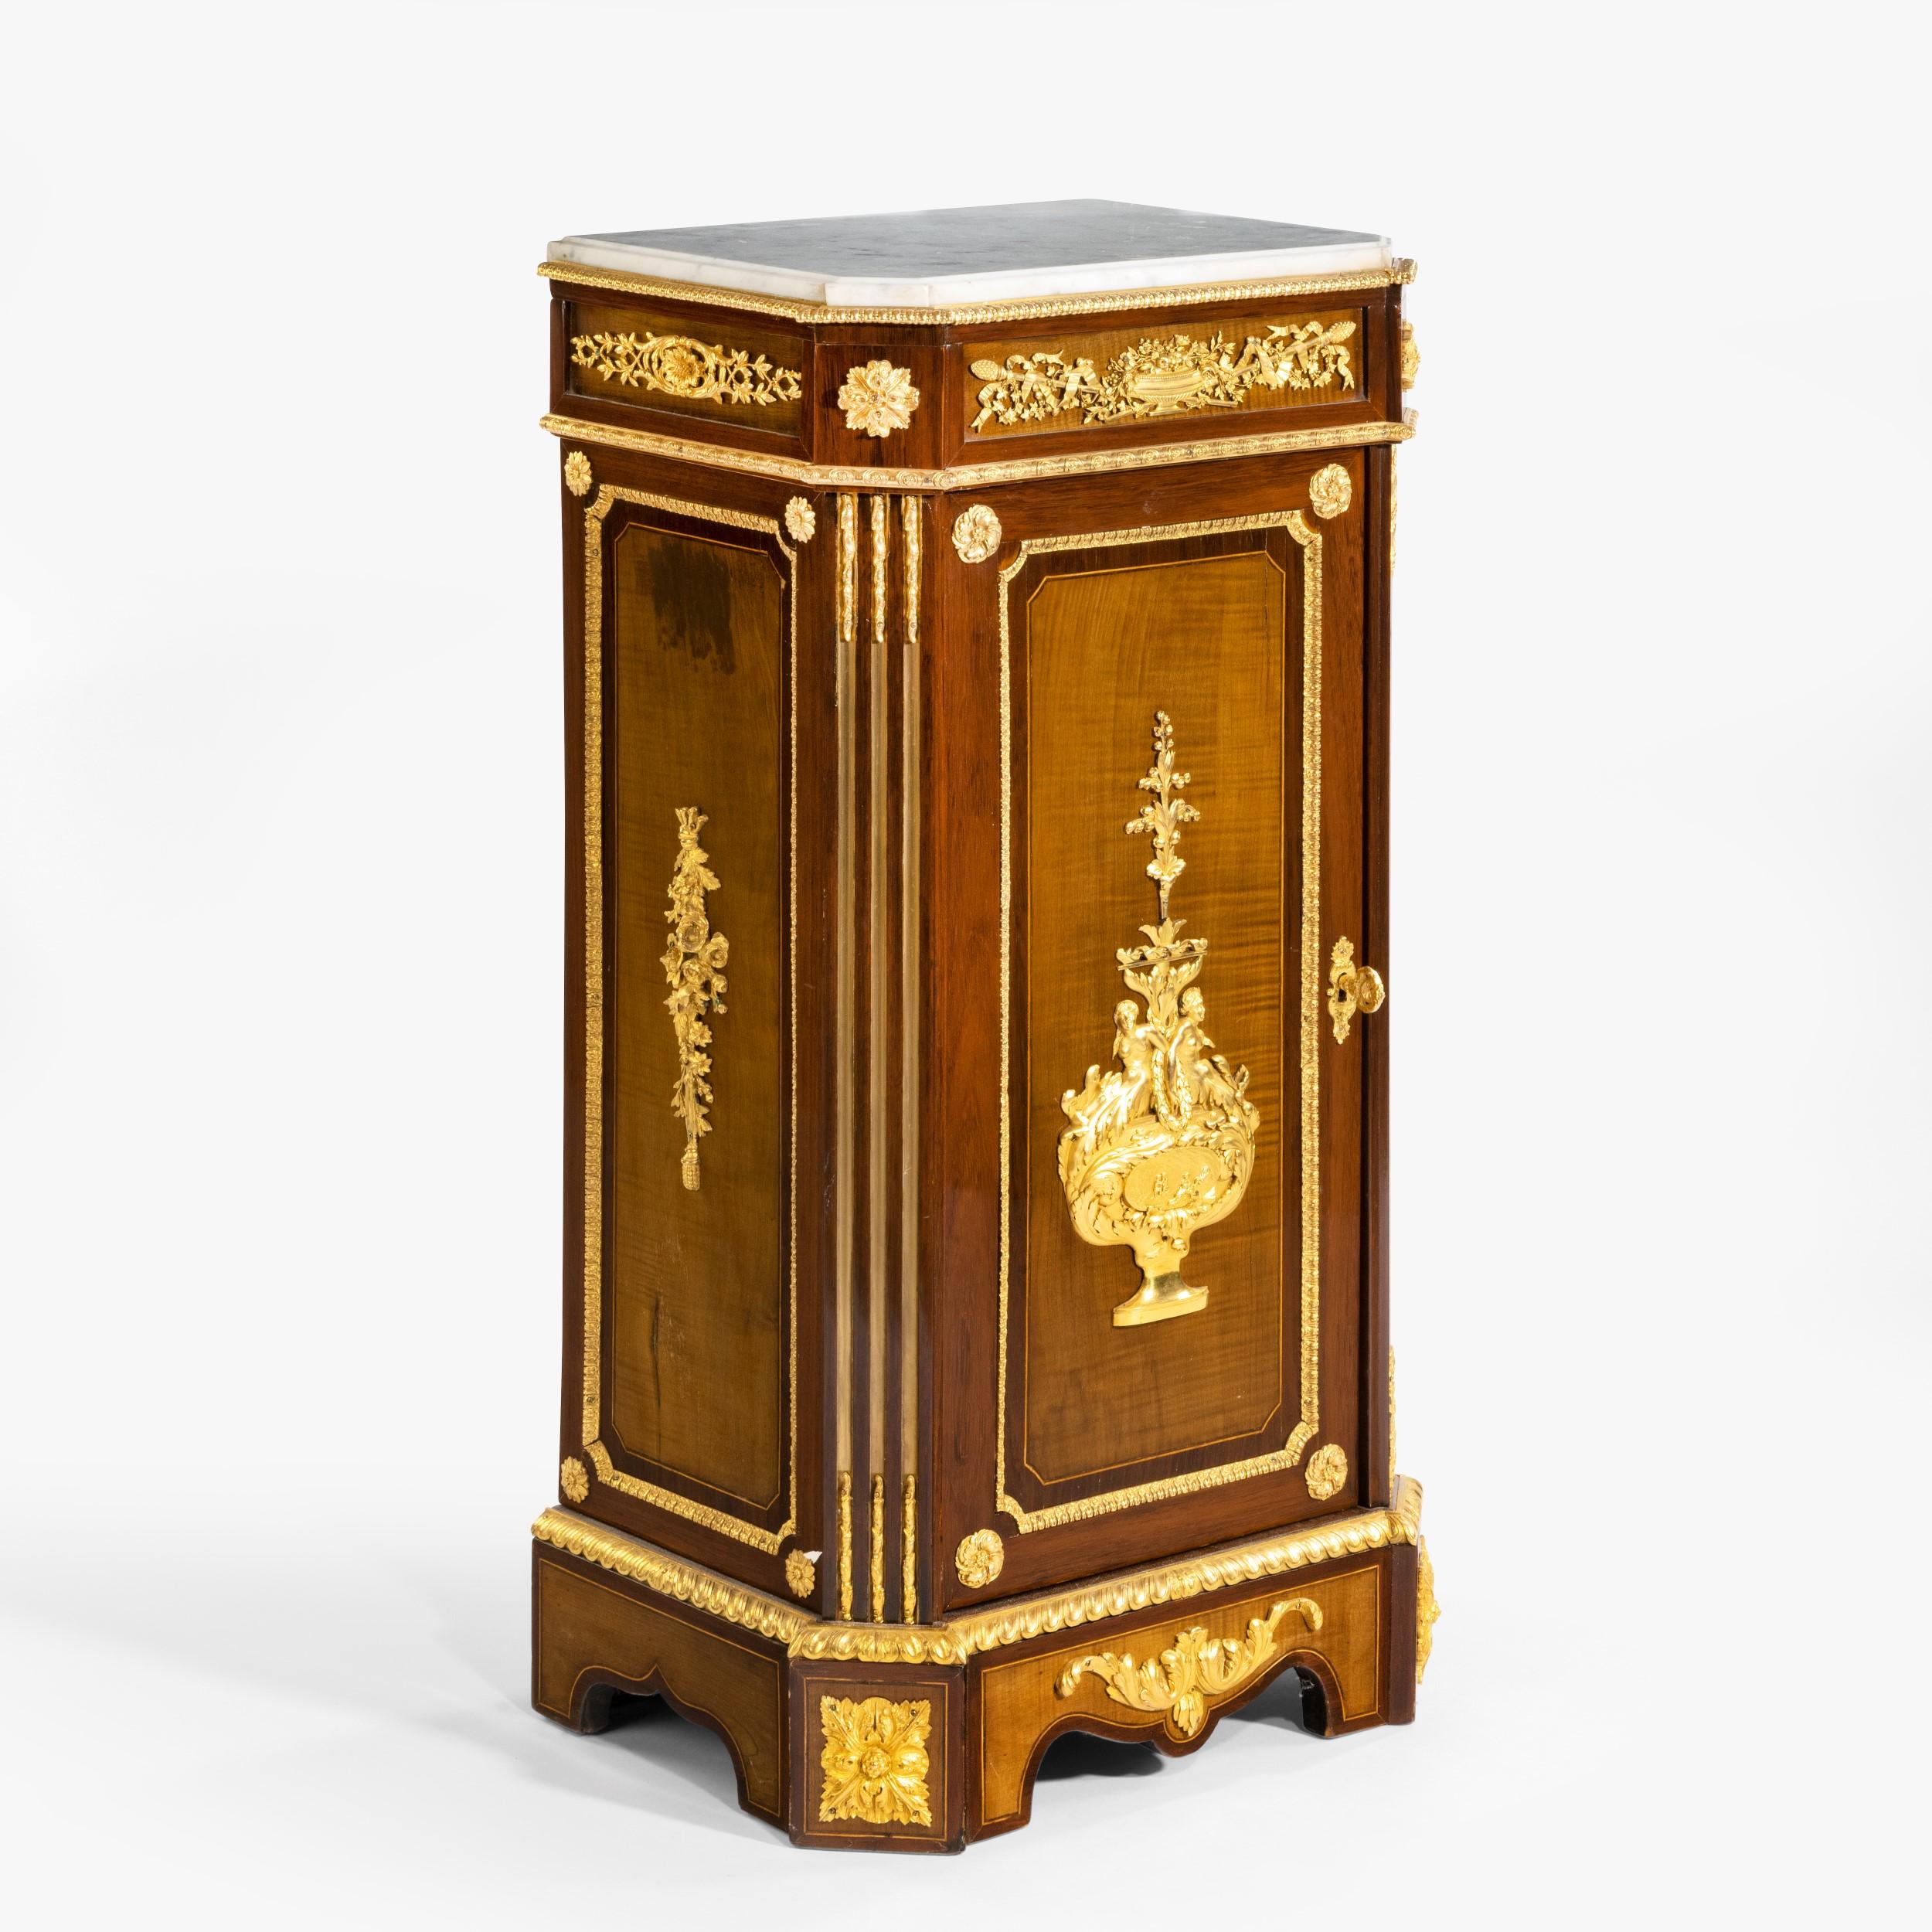 Napoleon III 19th Century French Pedestal Cabinet with Carrara Marble Top by Befort Jeune